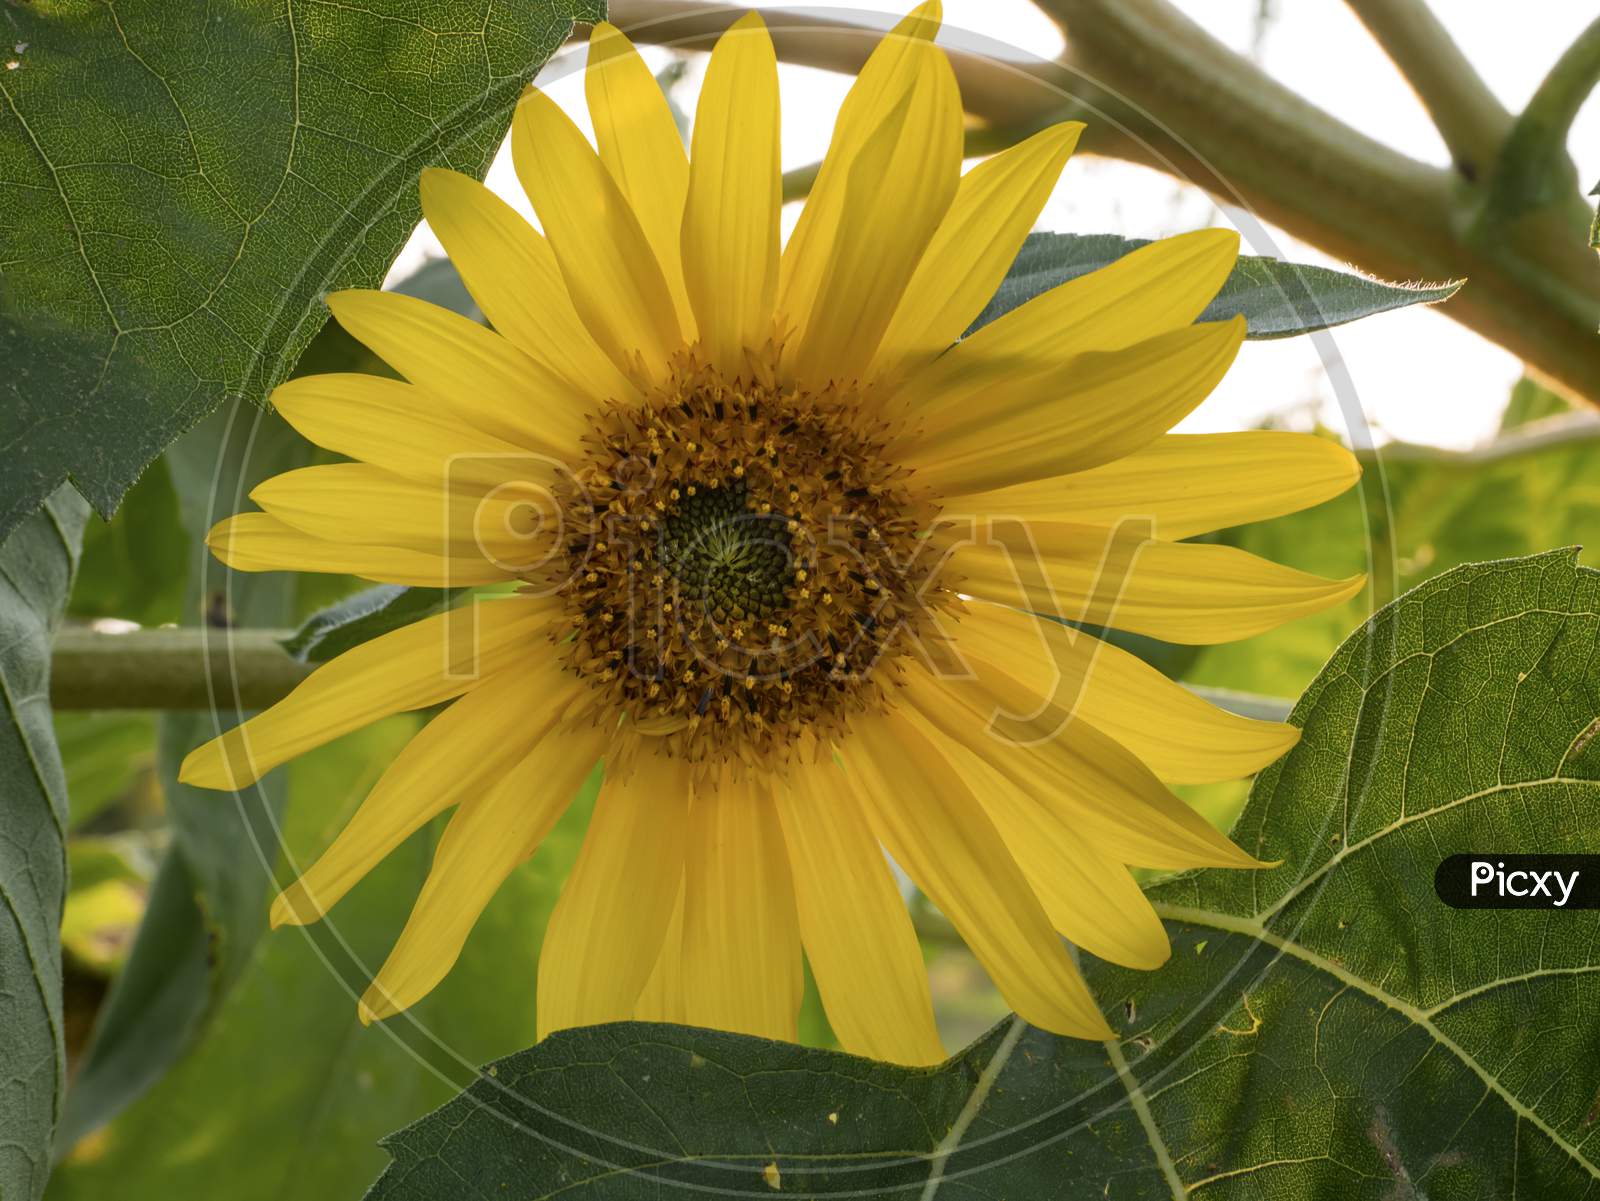 Sunflower Flower And Green Leaves In The Background